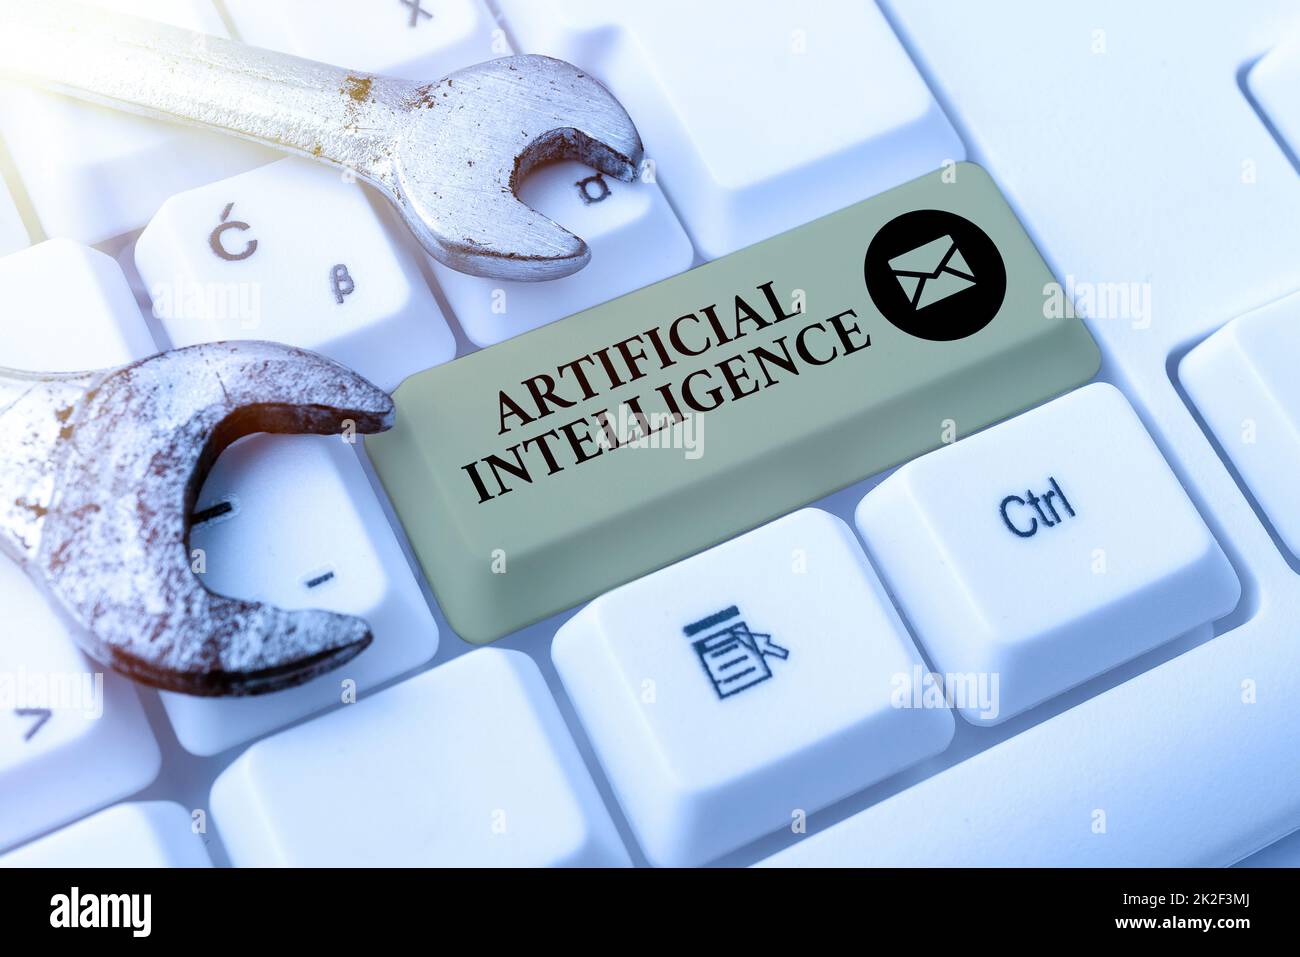 Conceptual caption Artificial Intelligence. Business approach programmed to think like human and mimic his actions Connecting With Online Friends, Making Acquaintances On The Internet Stock Photo